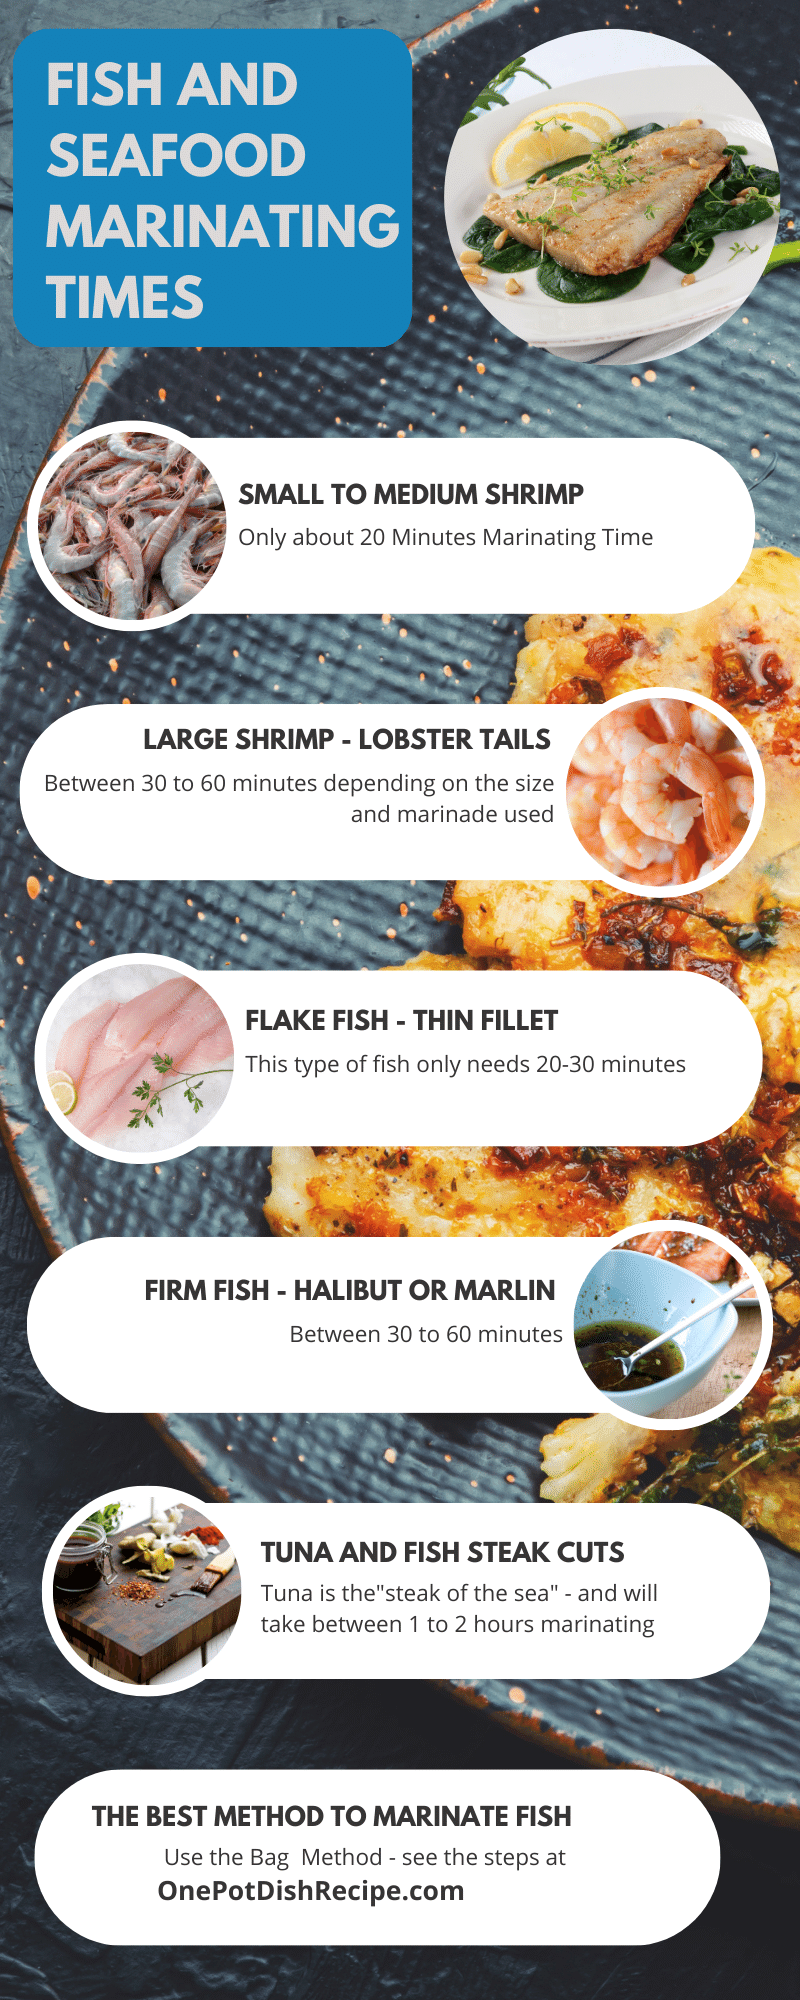 Fish and Seafood Marinating Times Infographic